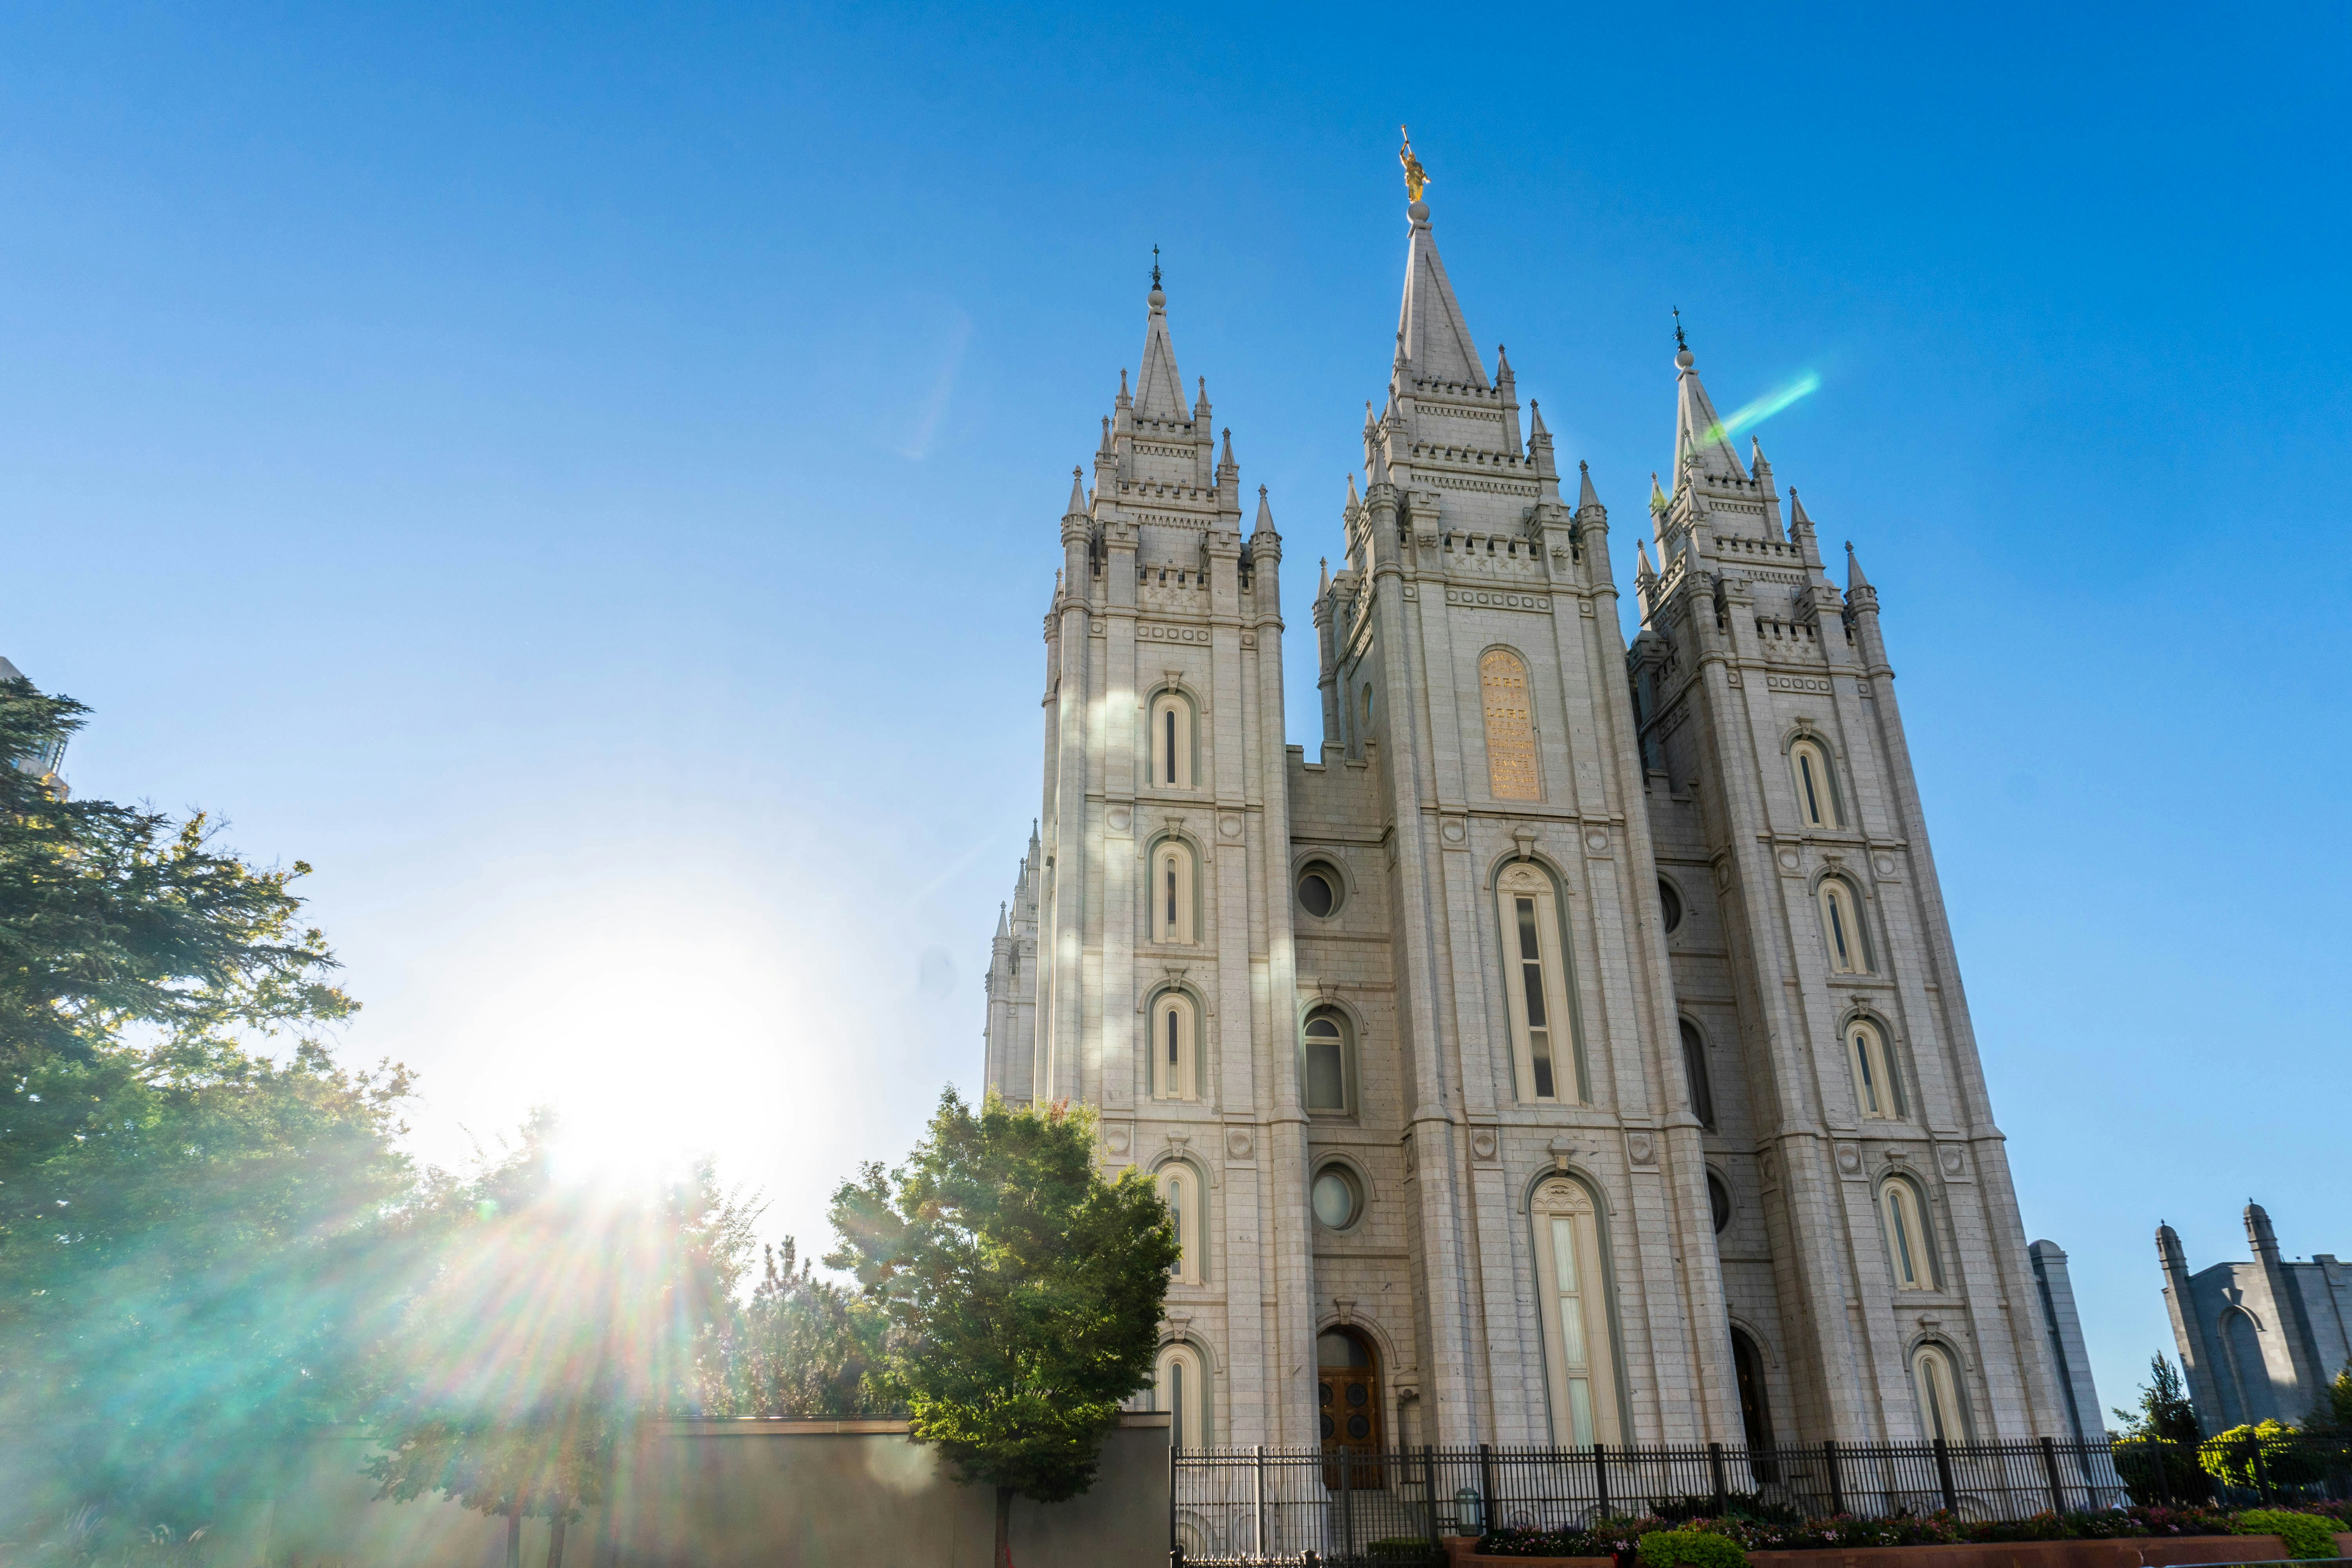 Exterior of the Salt Lake Temple at Temple Square, with a shining sun and blue skies overhead